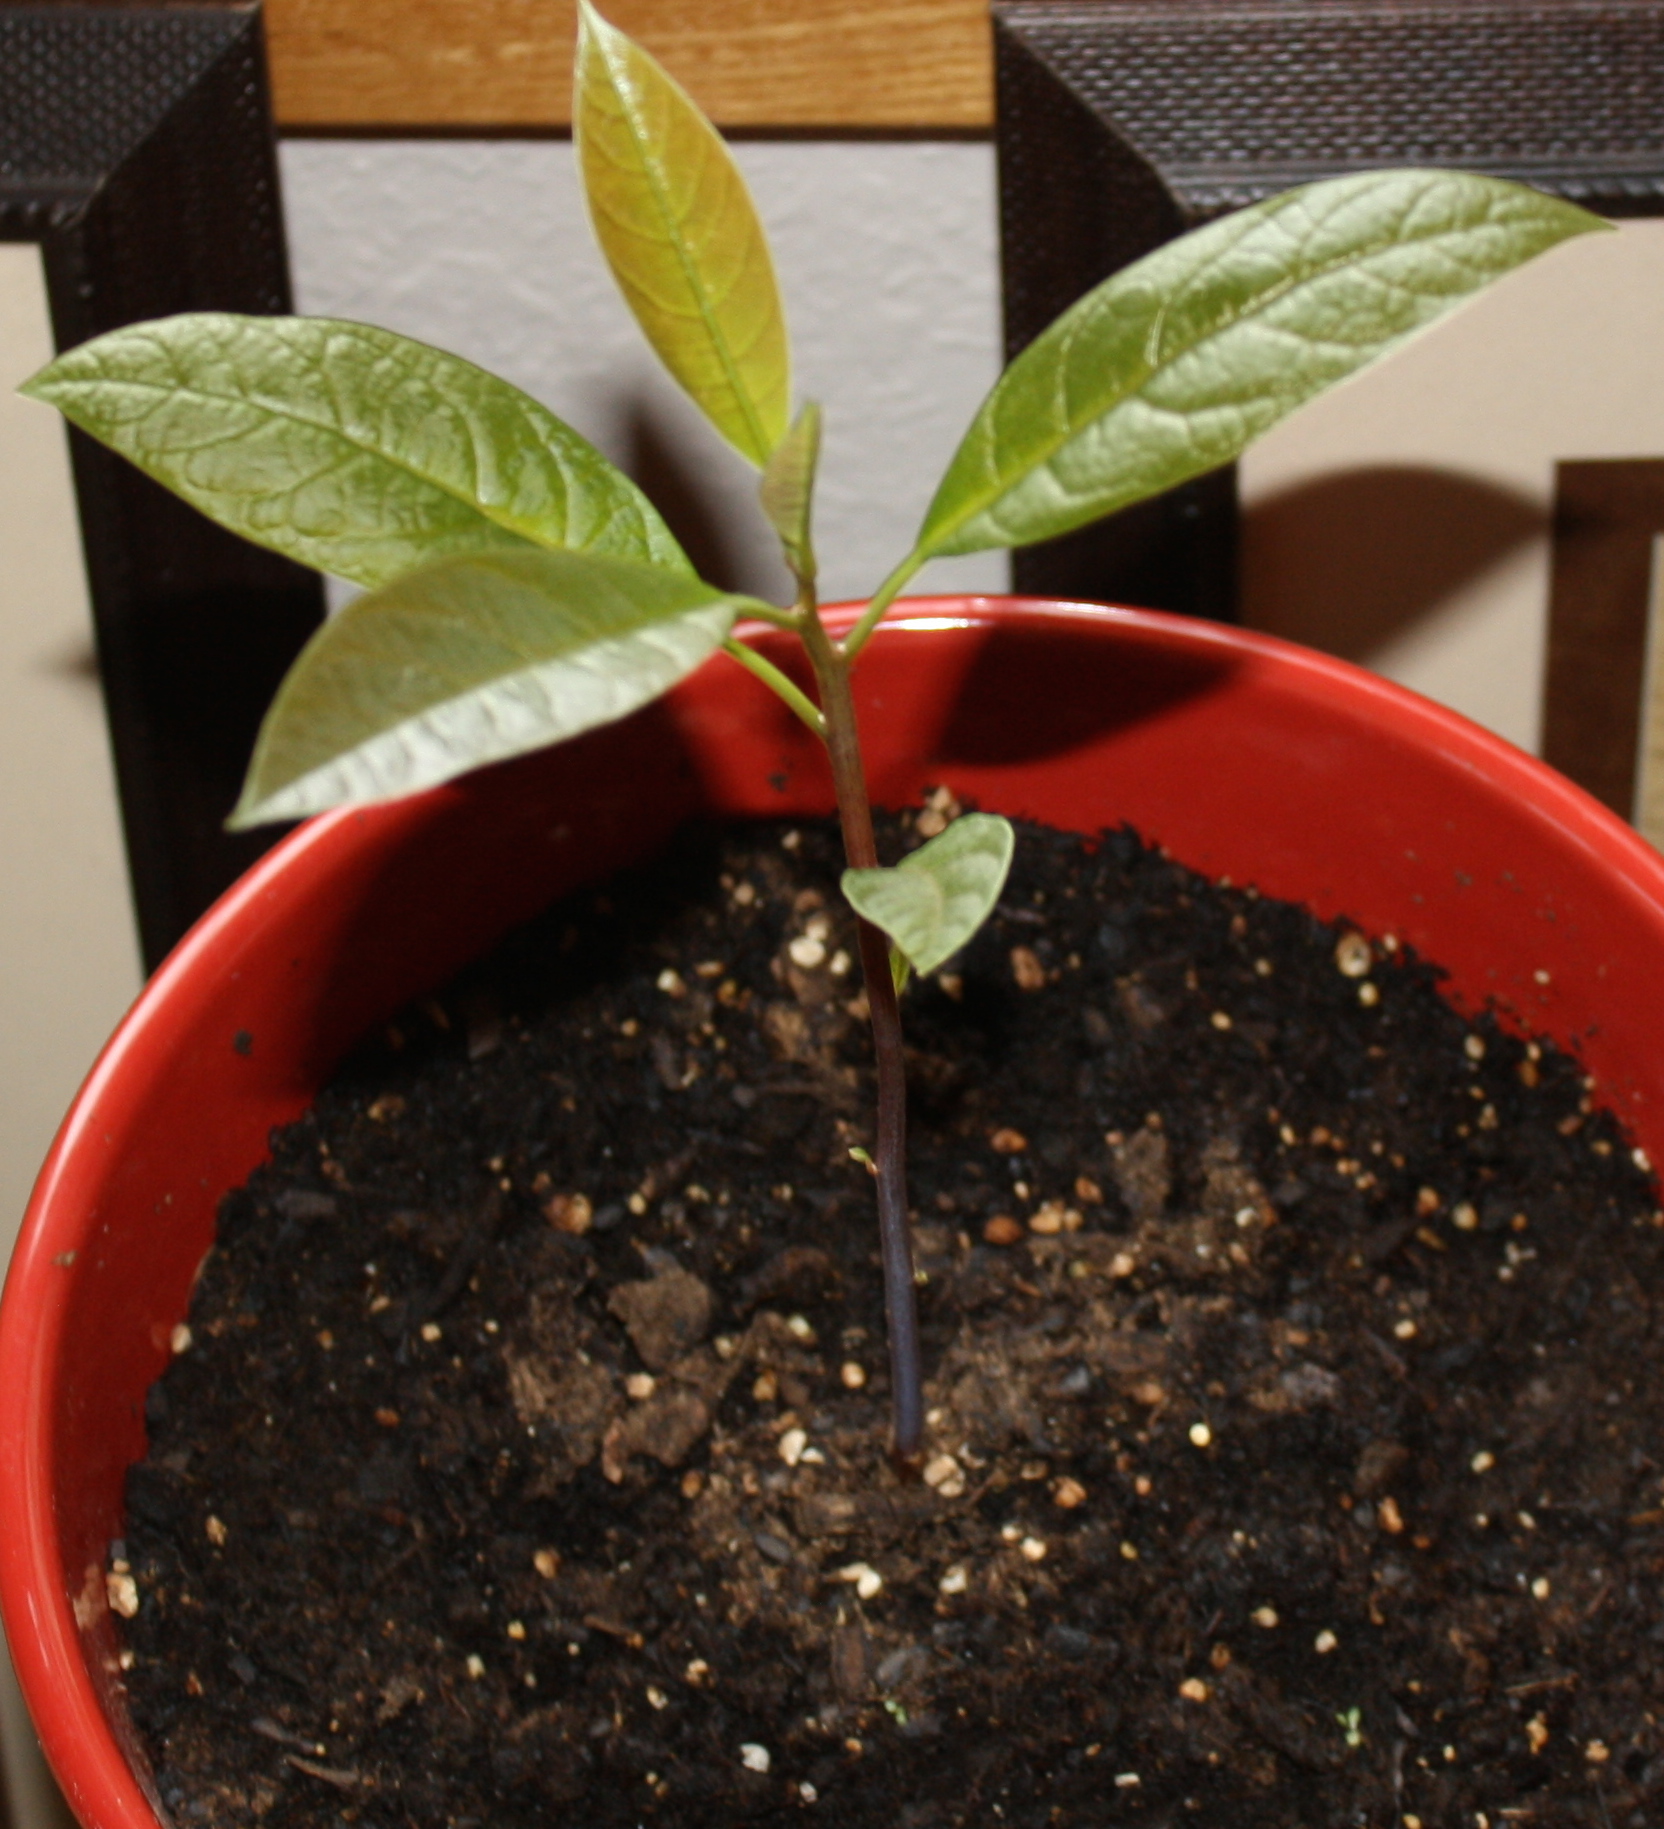 A young avocado tree in a large pot.